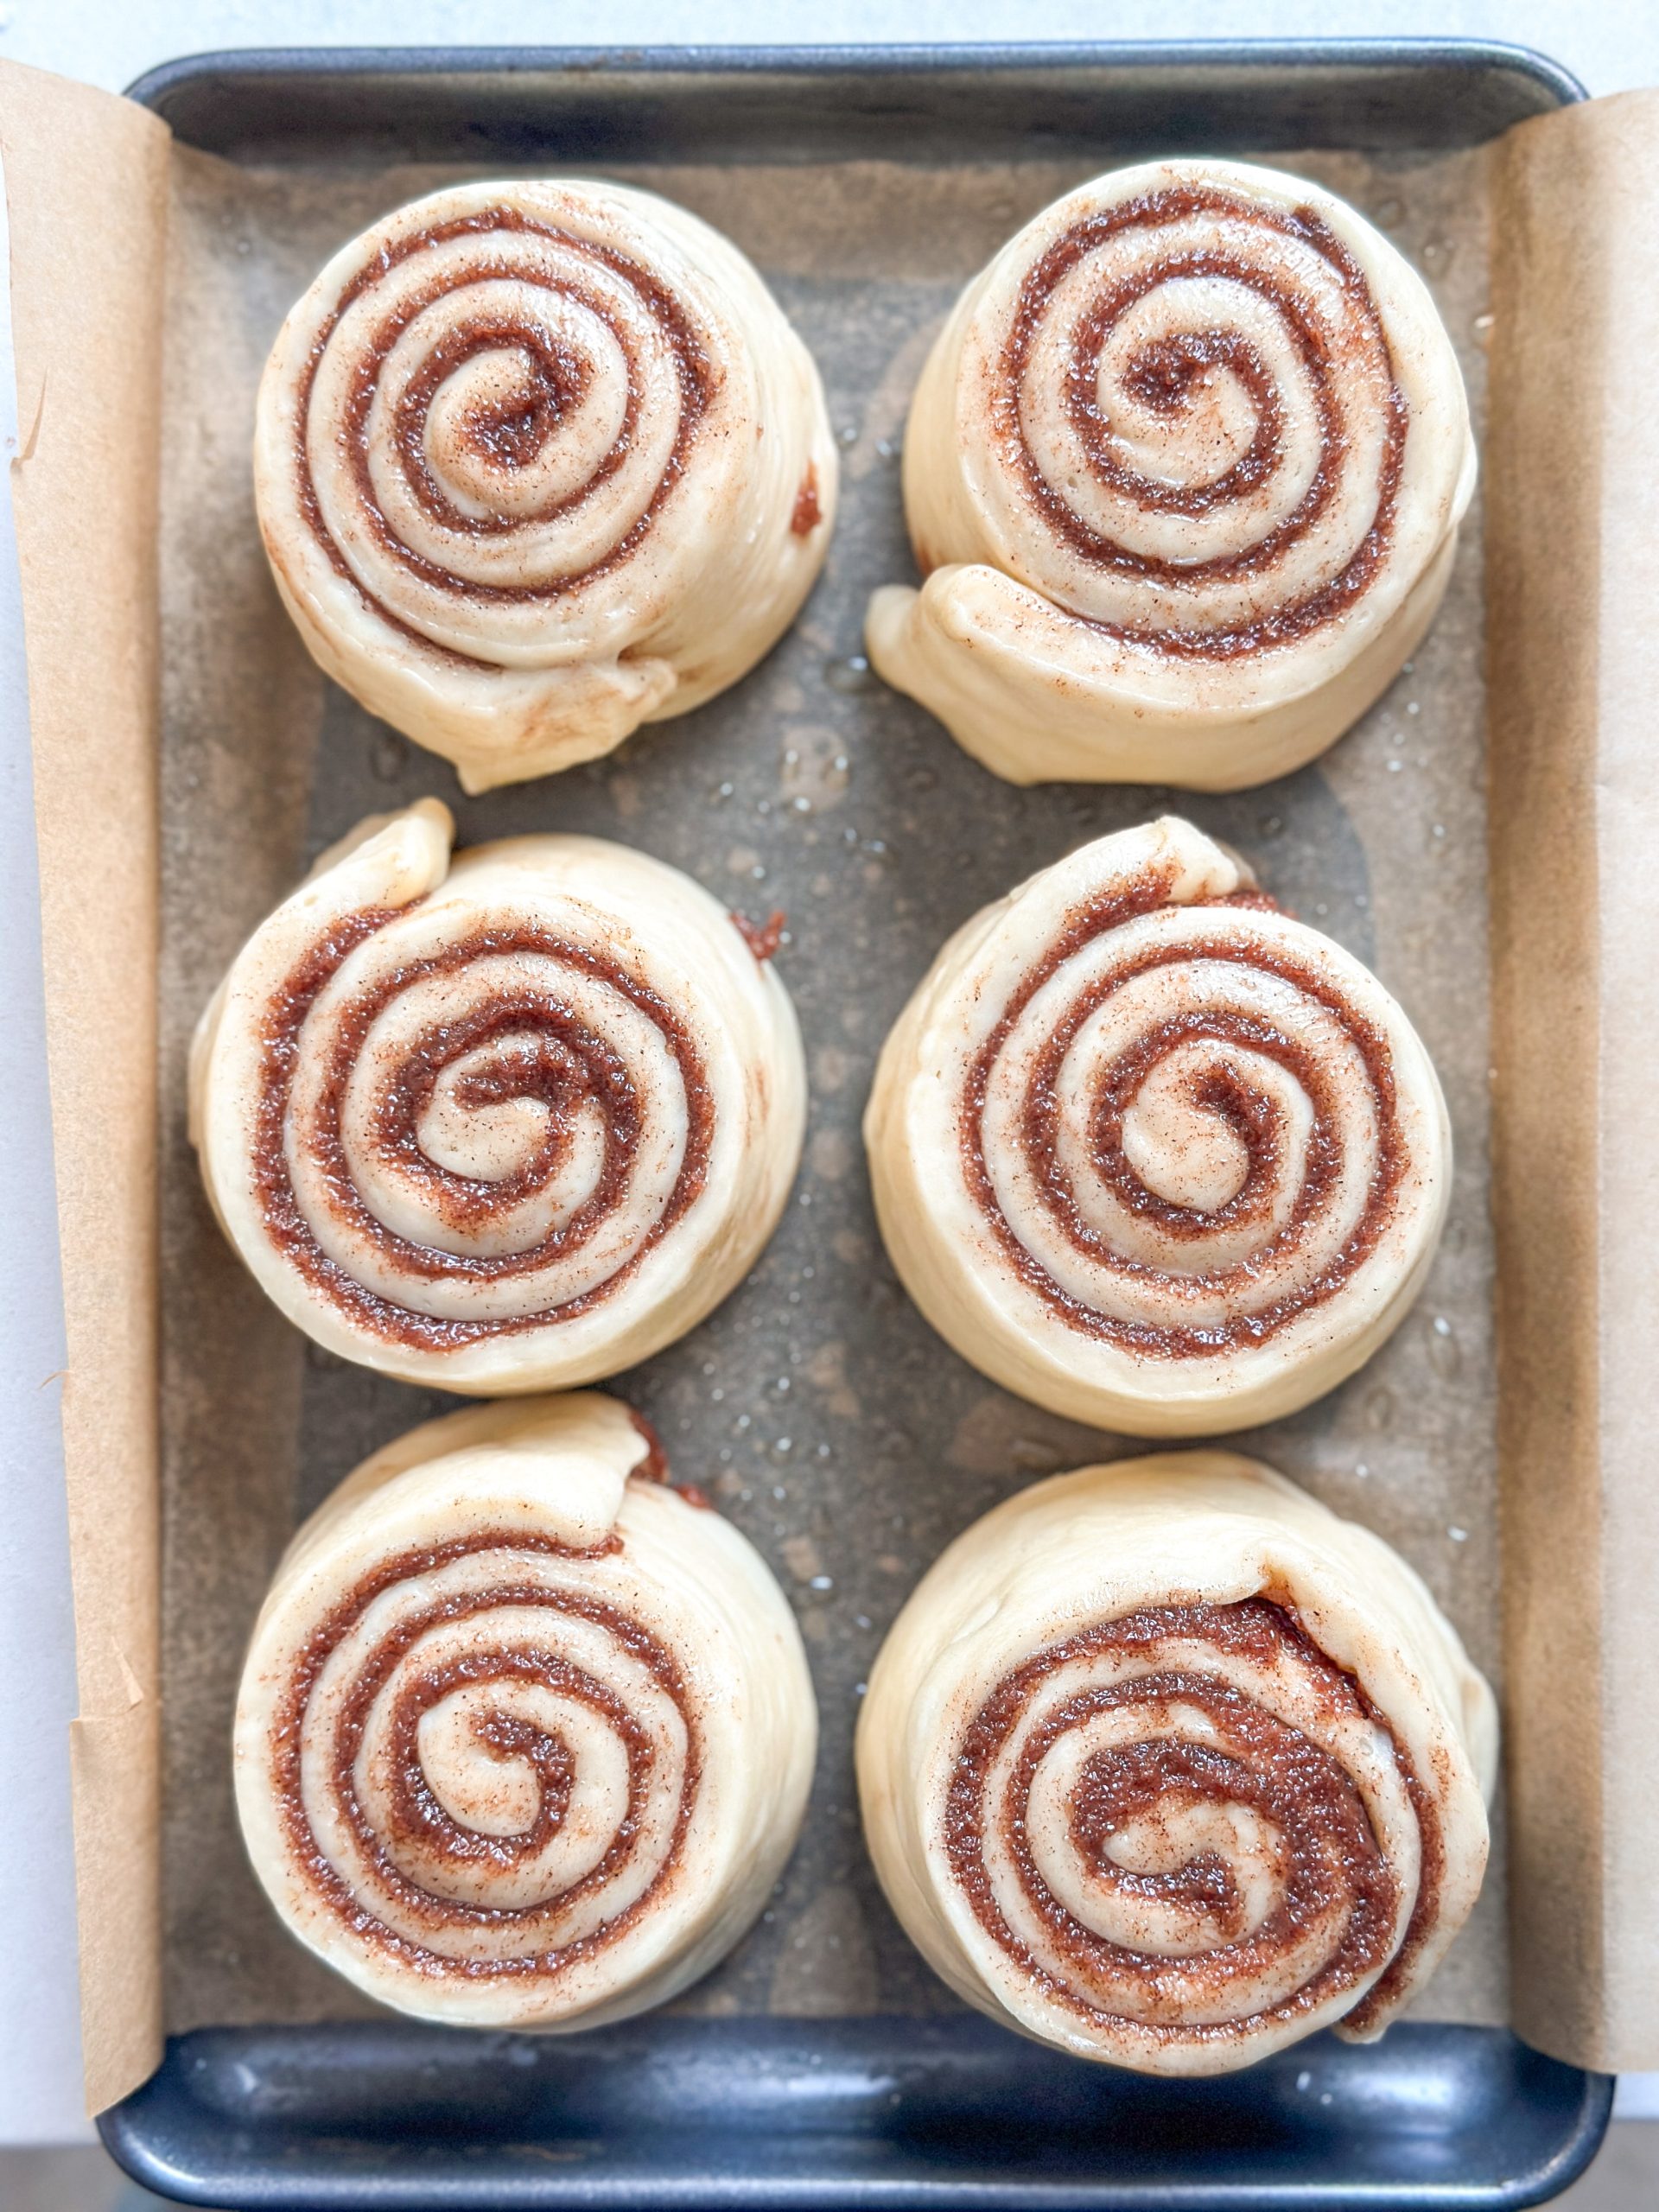 Small batch of 6 uncooked cinnamon rolls in an eighth pan